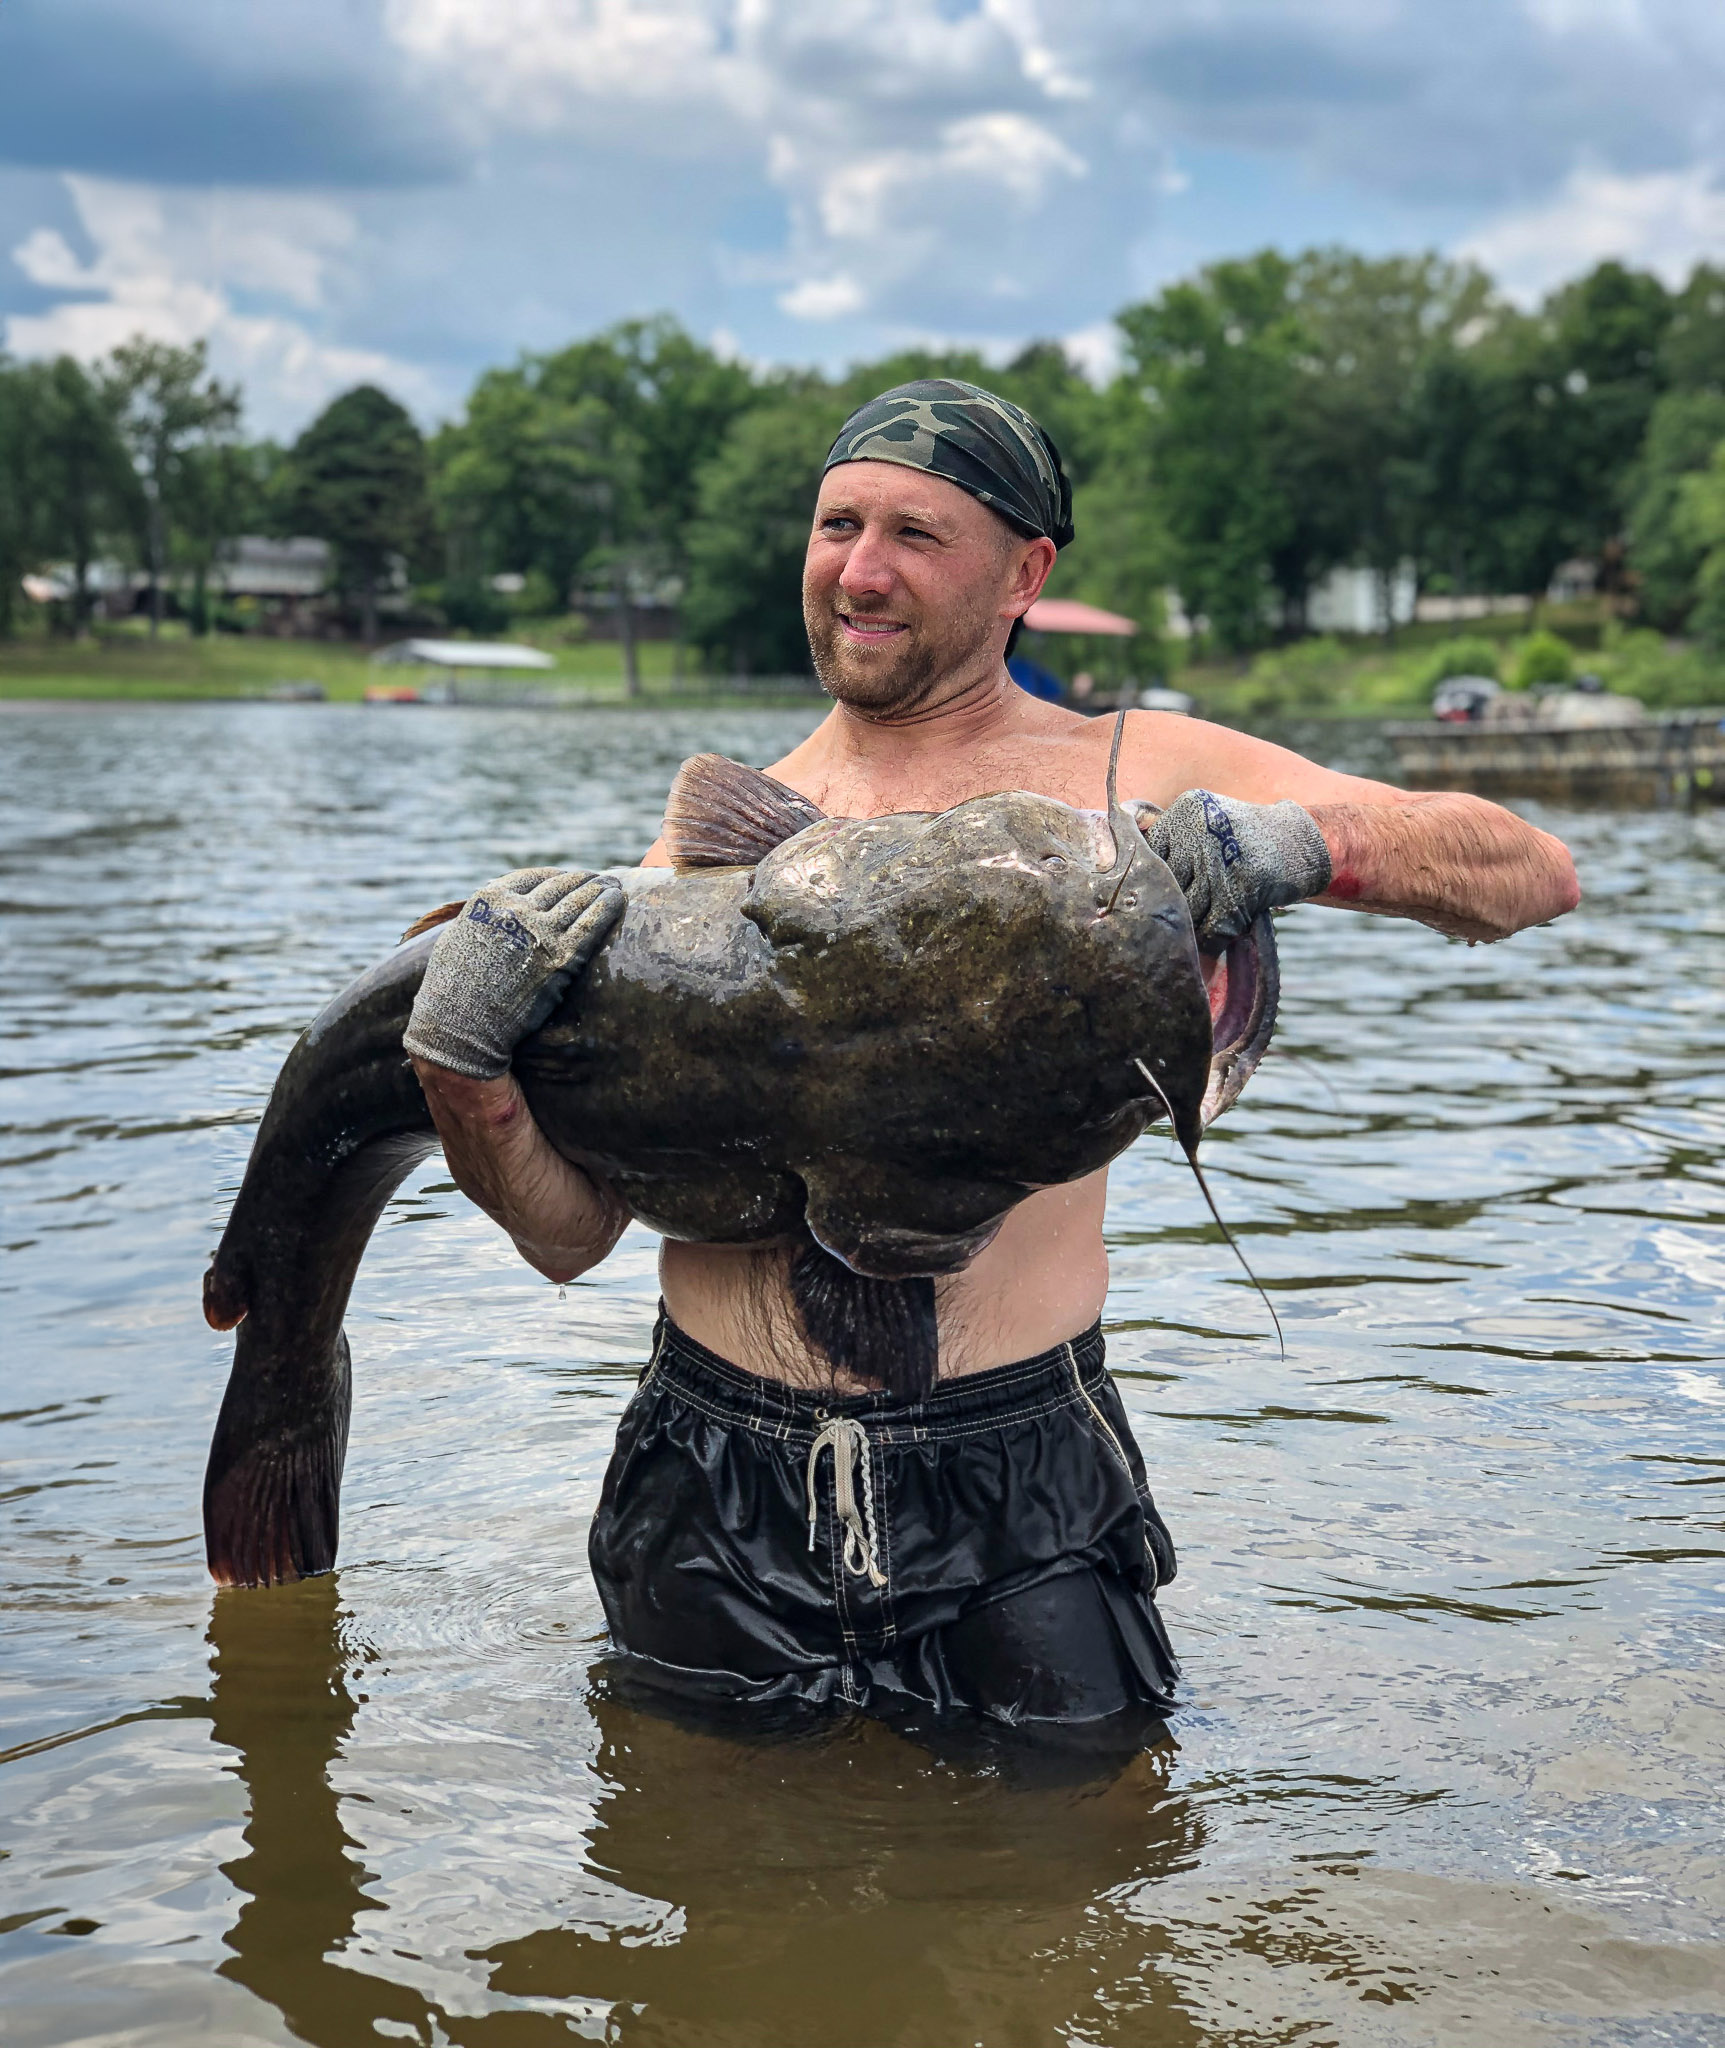 Do you have what it takes to catch a catfish with your bare hands